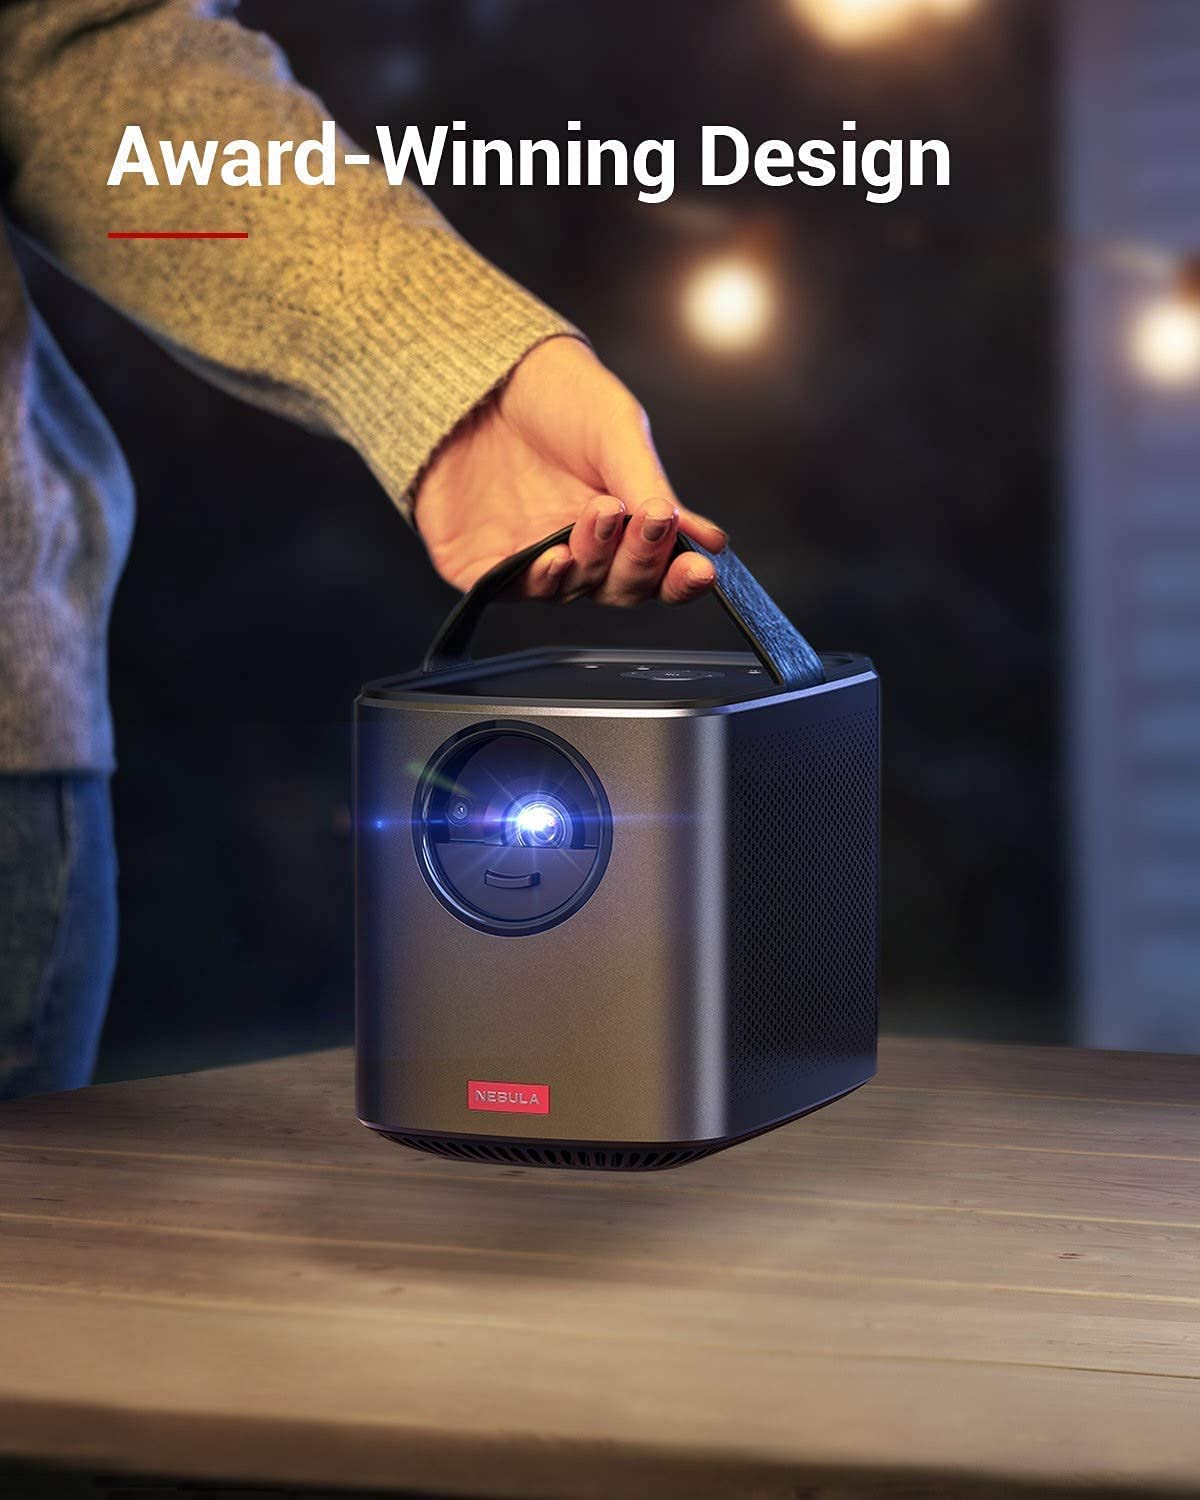 Nebula by Anker Mars II Pro 500 ANSI Lumen Portable Projector with Anker Nebula Mars Official Carry Case